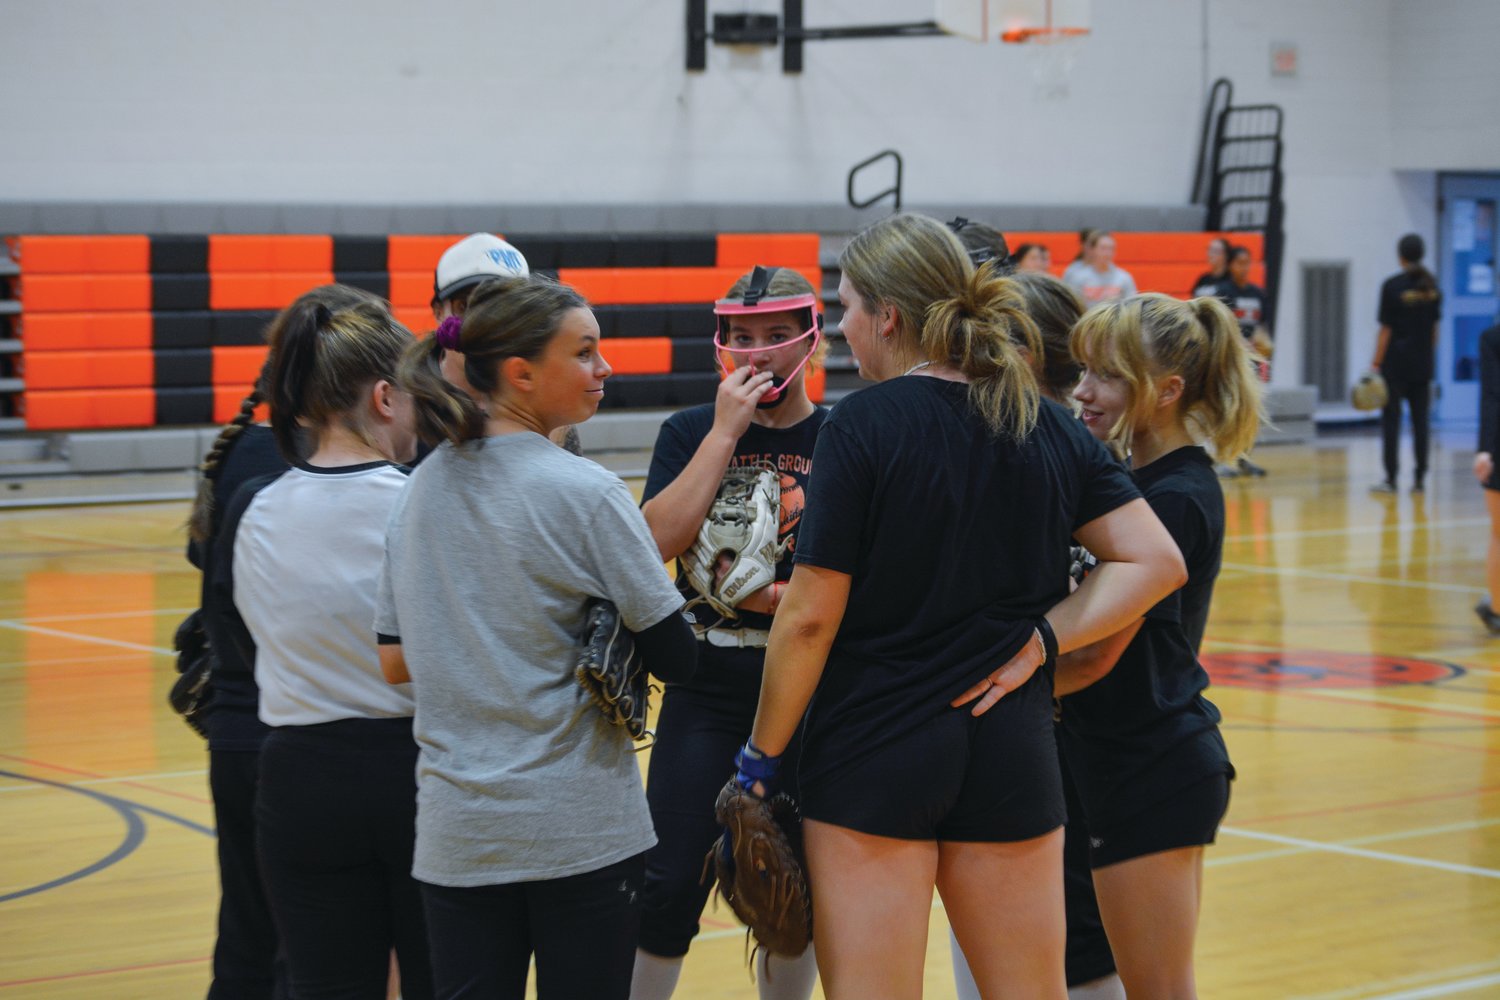 The Battle Ground High School girls softball team huddles together during practice on Oct. 20.